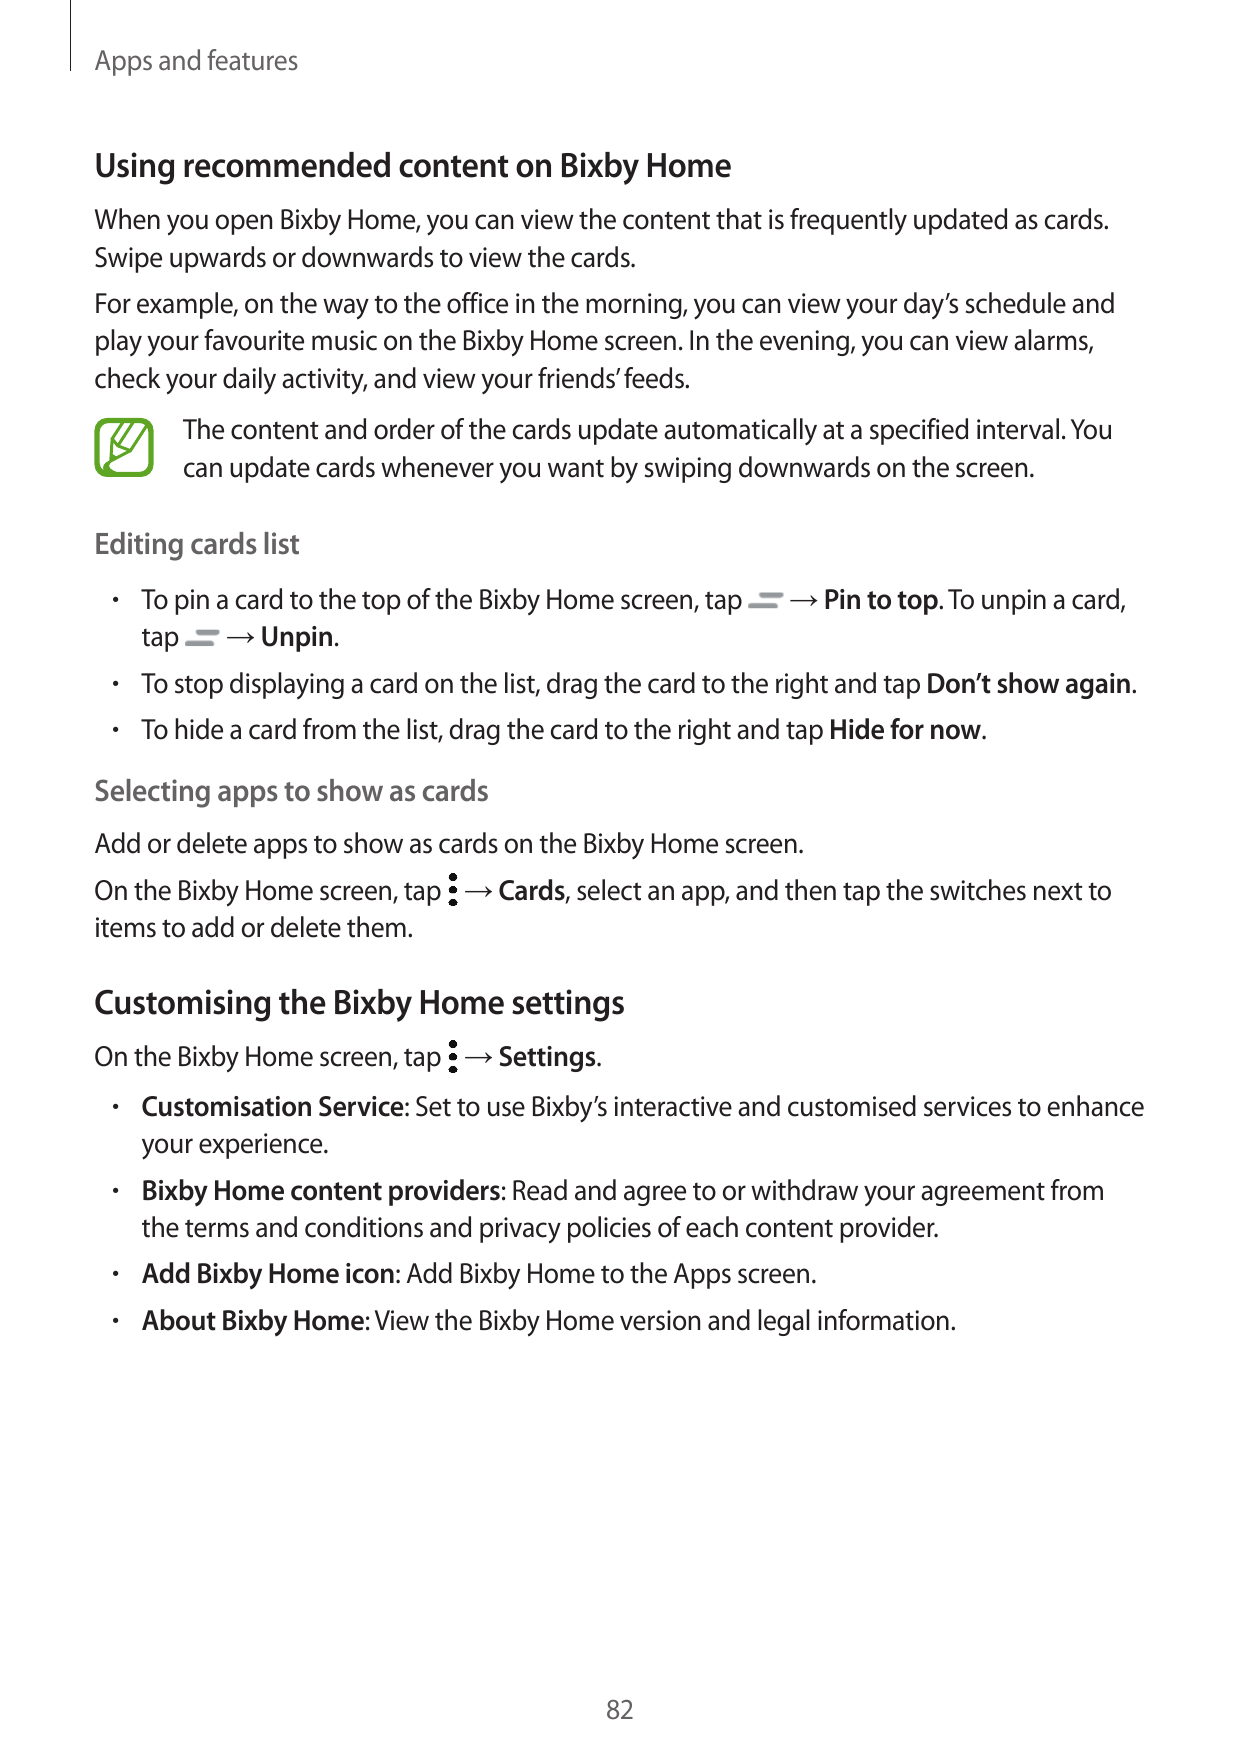 Apps and featuresUsing recommended content on Bixby HomeWhen you open Bixby Home, you can view the content that is frequently up